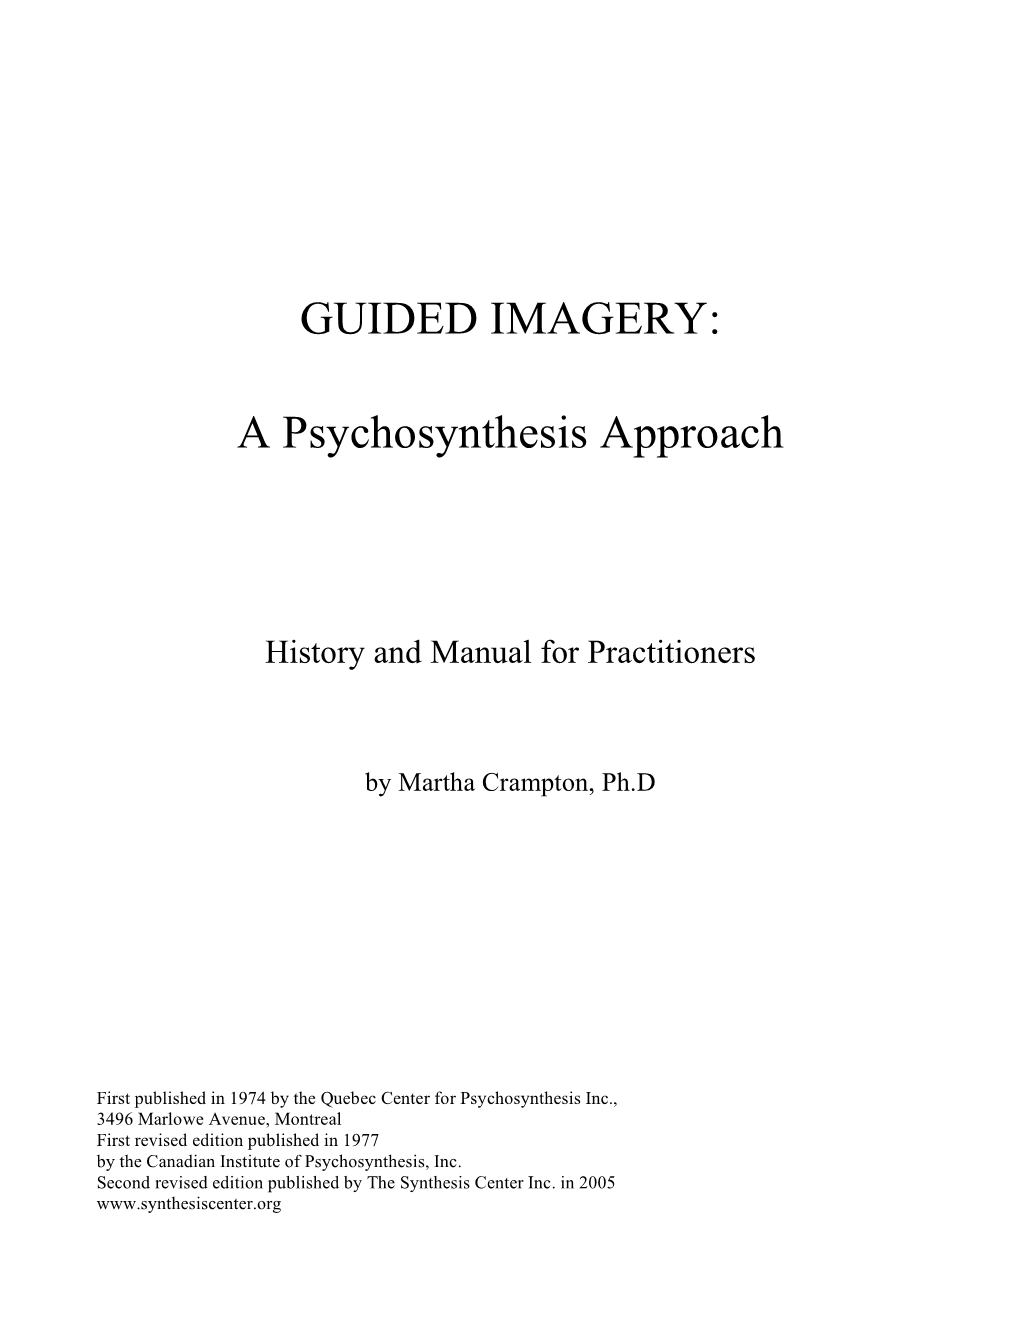 GUIDED IMAGERY: a Psychosynthesis Approach